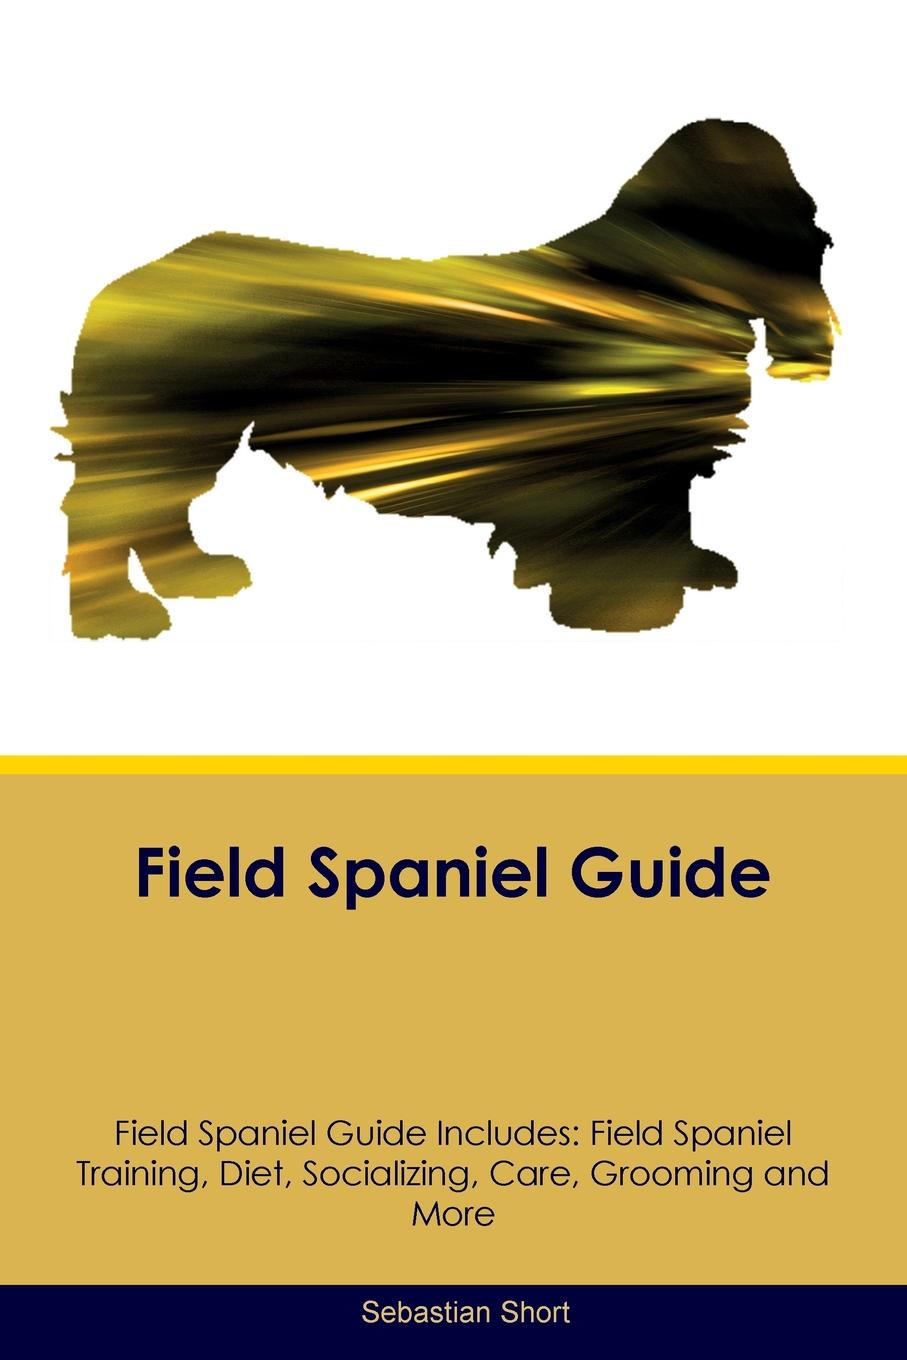 Field Spaniel Guide Field Spaniel Guide Includes. Field Spaniel Training, Diet, Socializing, Care, Grooming, Breeding and More